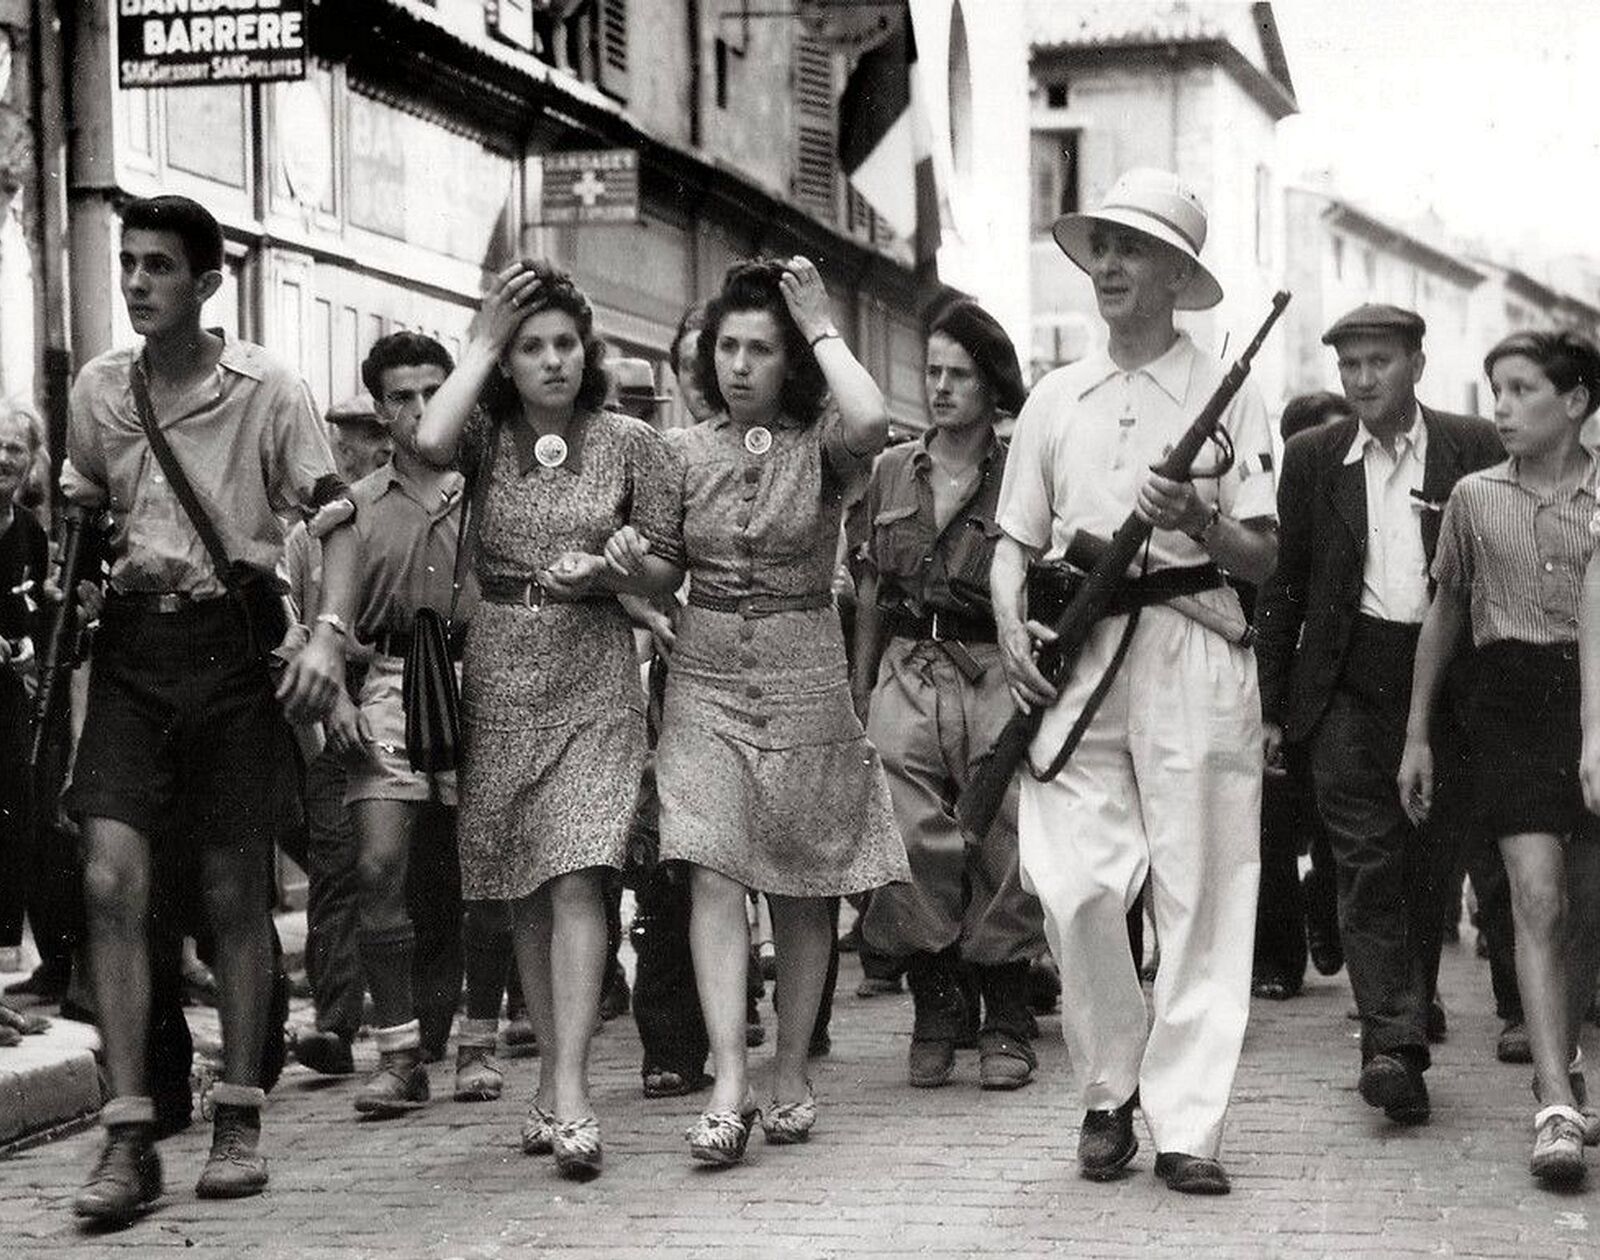 WW2 FRENCH WOMEN SUSPECTED of COLLABORATION Marched Through Streets PHOTO (179y